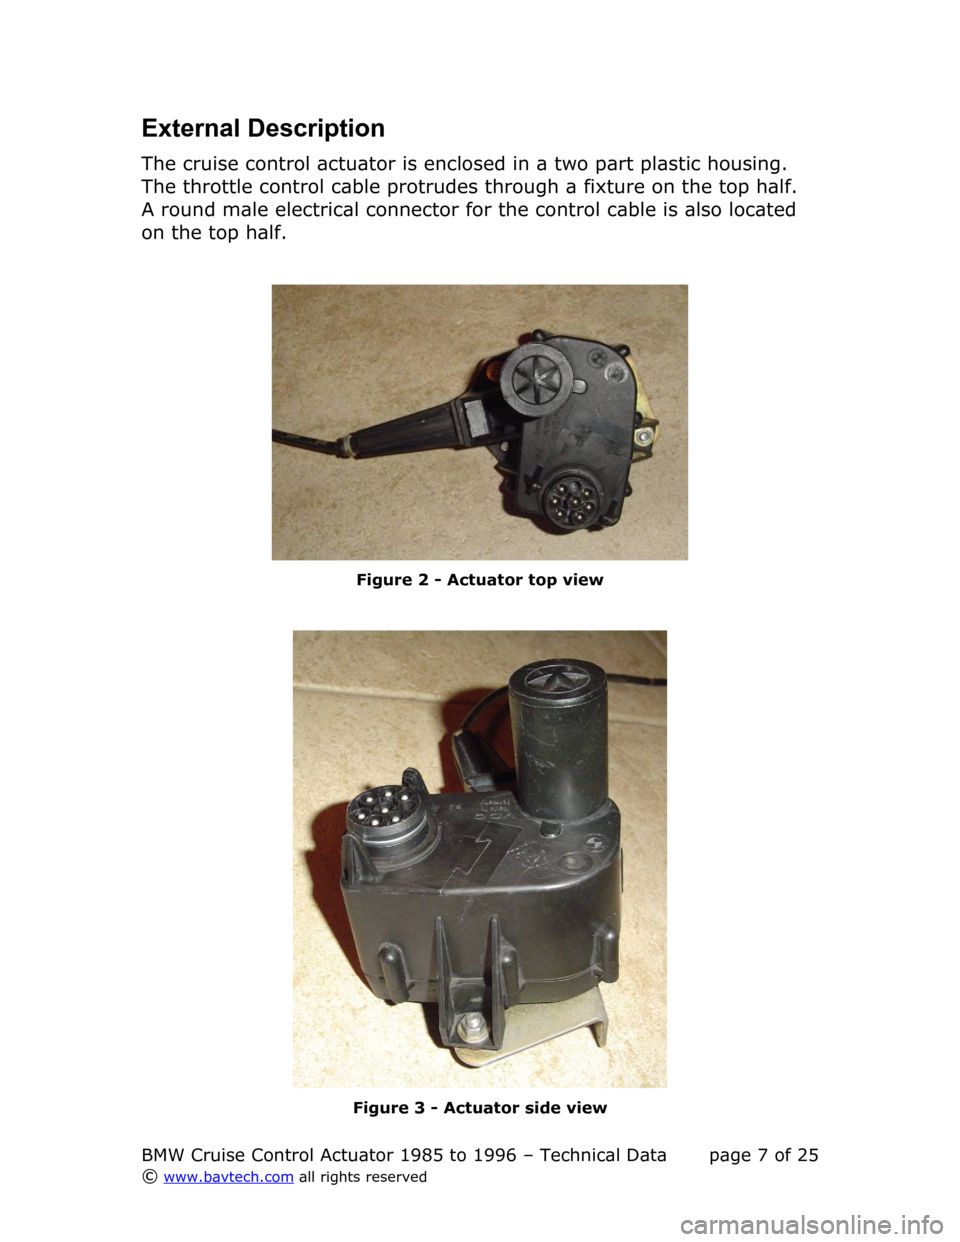 BMW 5 SERIES 1988 E34 Cruise Control Acutator Technical Data Workshop Manual External Description
The cruise control actuator is enclosed in a two part plastic housing.  
The throttle control cable protrudes through a fixture on the top half.  
A round male electrical connecto